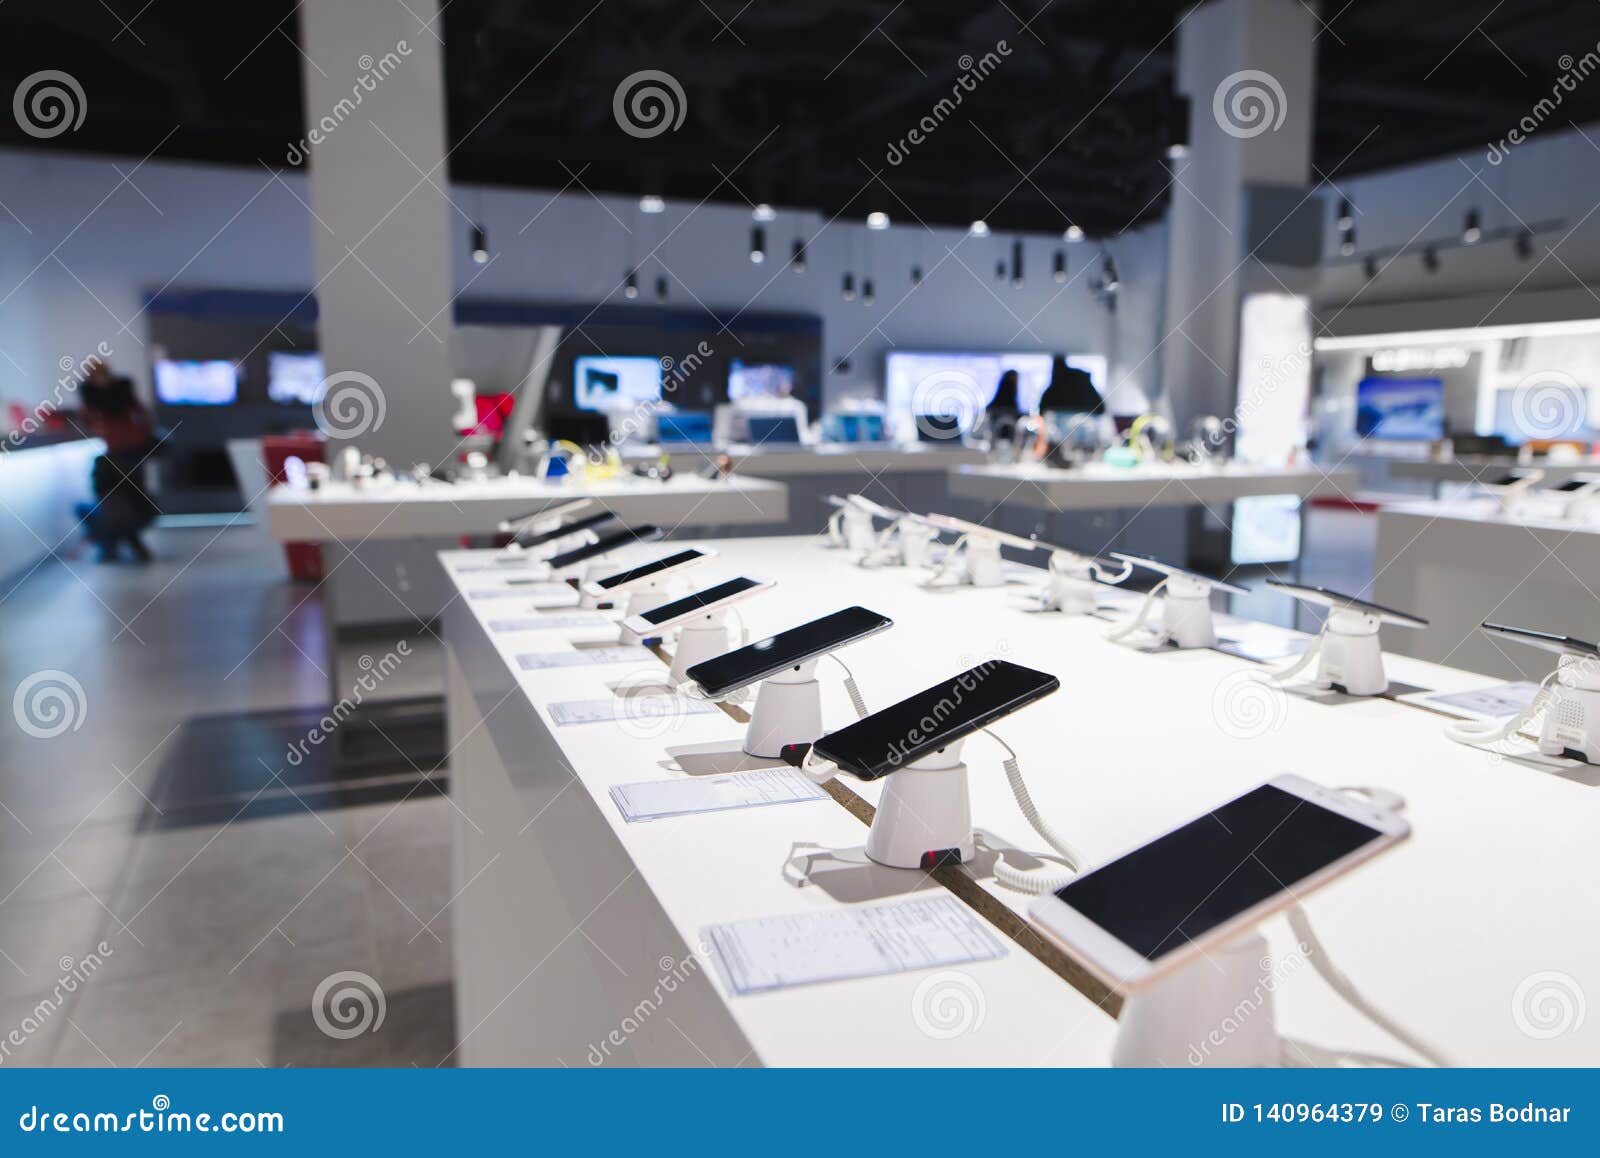 smartphones are on the table in the technology store. buying a mobile phone at the electronics store